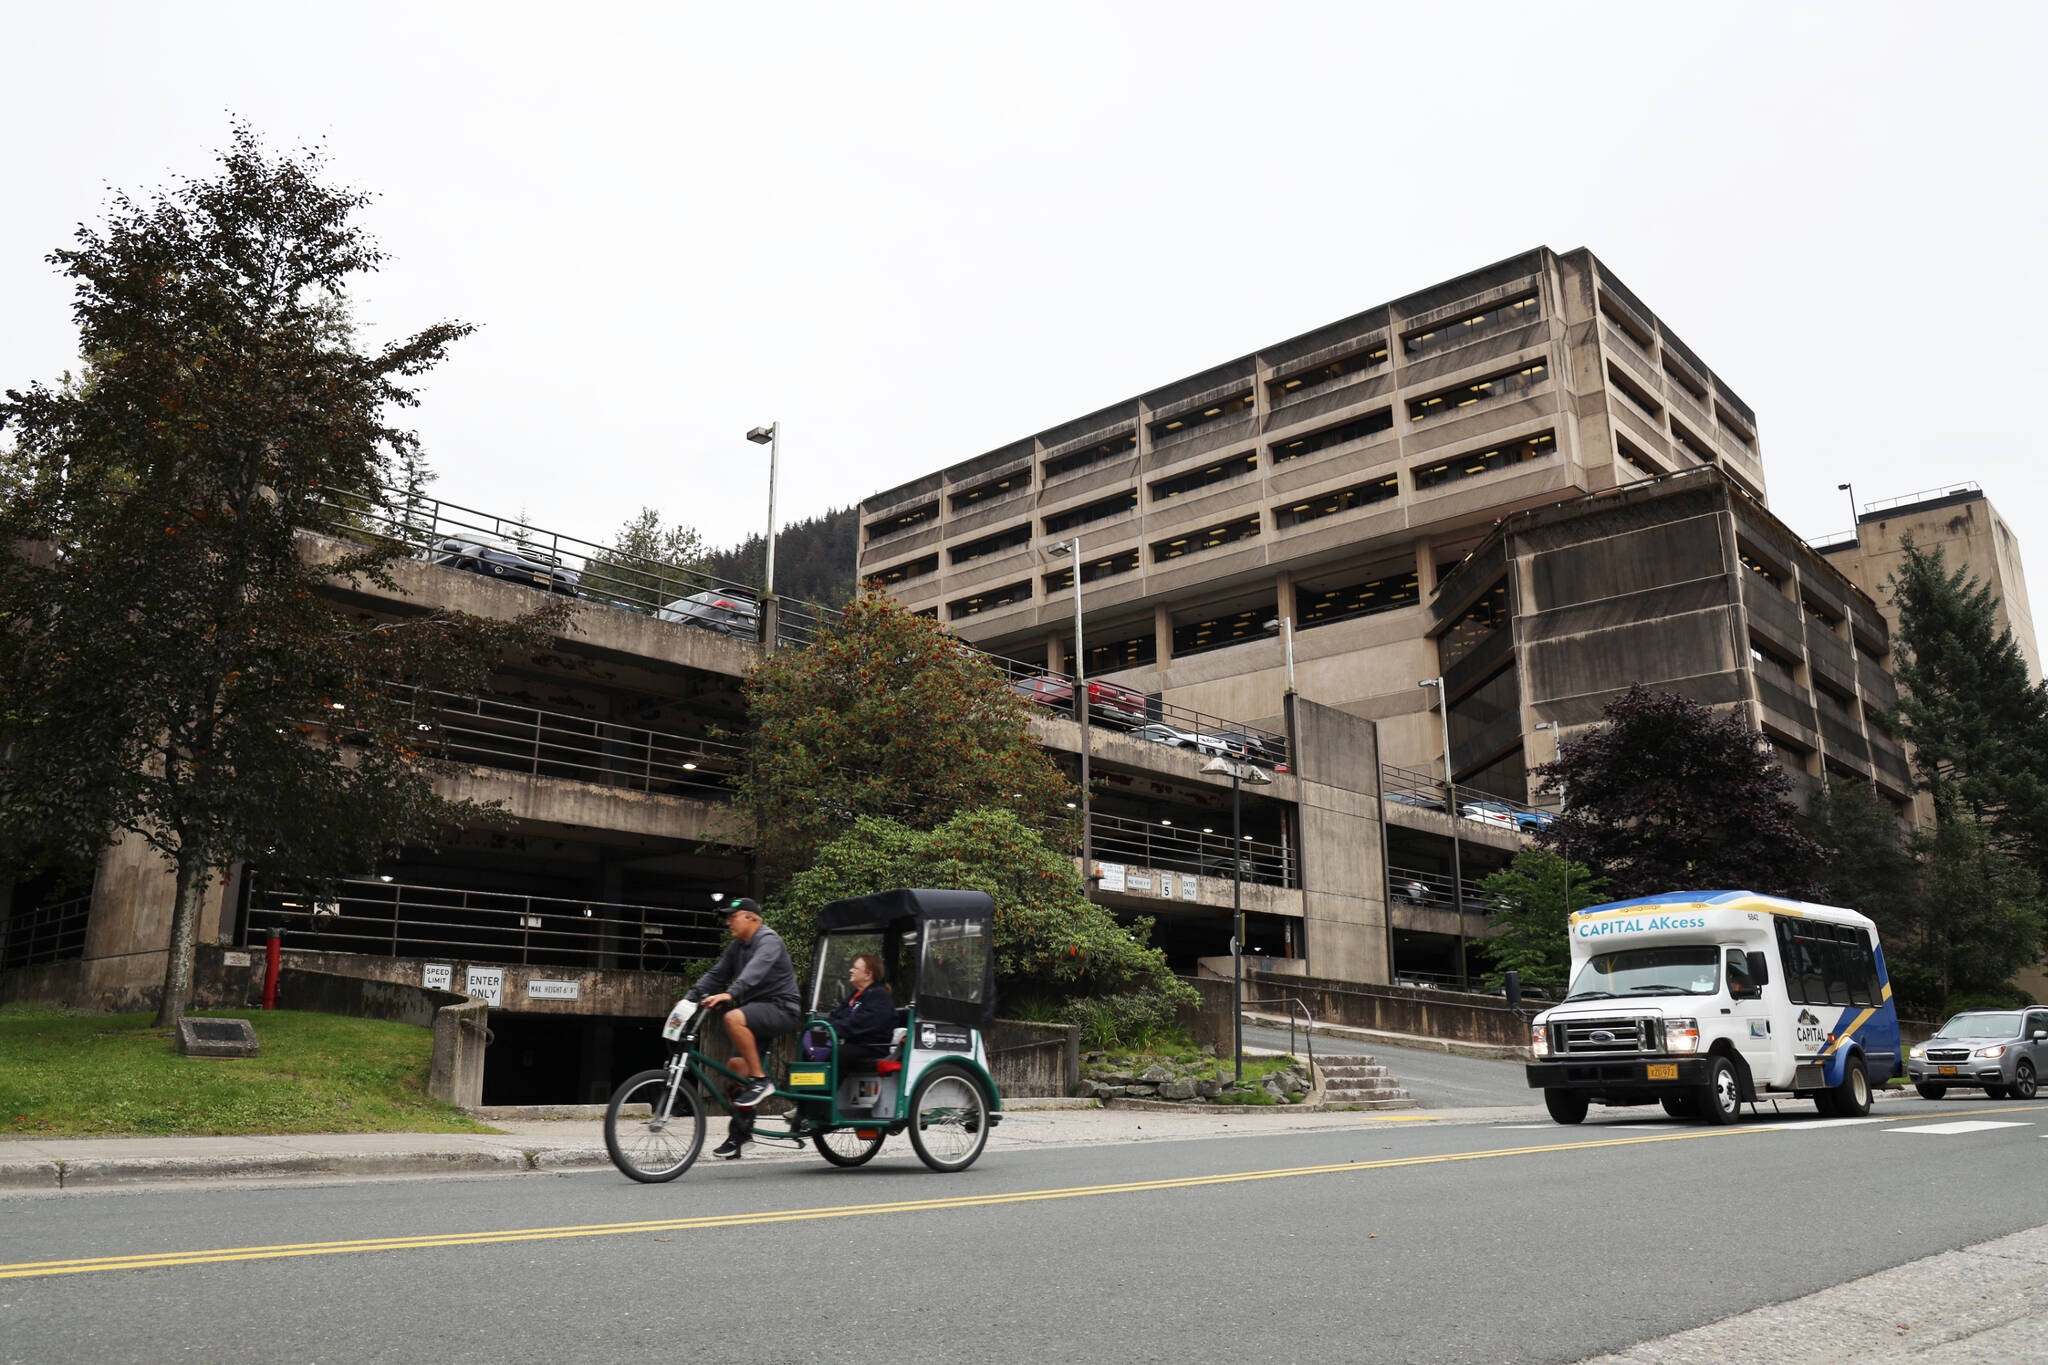 Clarise Larson / Juneau Empire
A cycle rickshaw passes the North State Office Building parking garage located on Willoughby Avenue in downtown Juneau. The City and Borough of Juneau’s Assembly passed an ordinance unopposed Monday night that gave the OK for the appropriation of $5 million to go toward partially funding the planning and construction of additional parking levels.